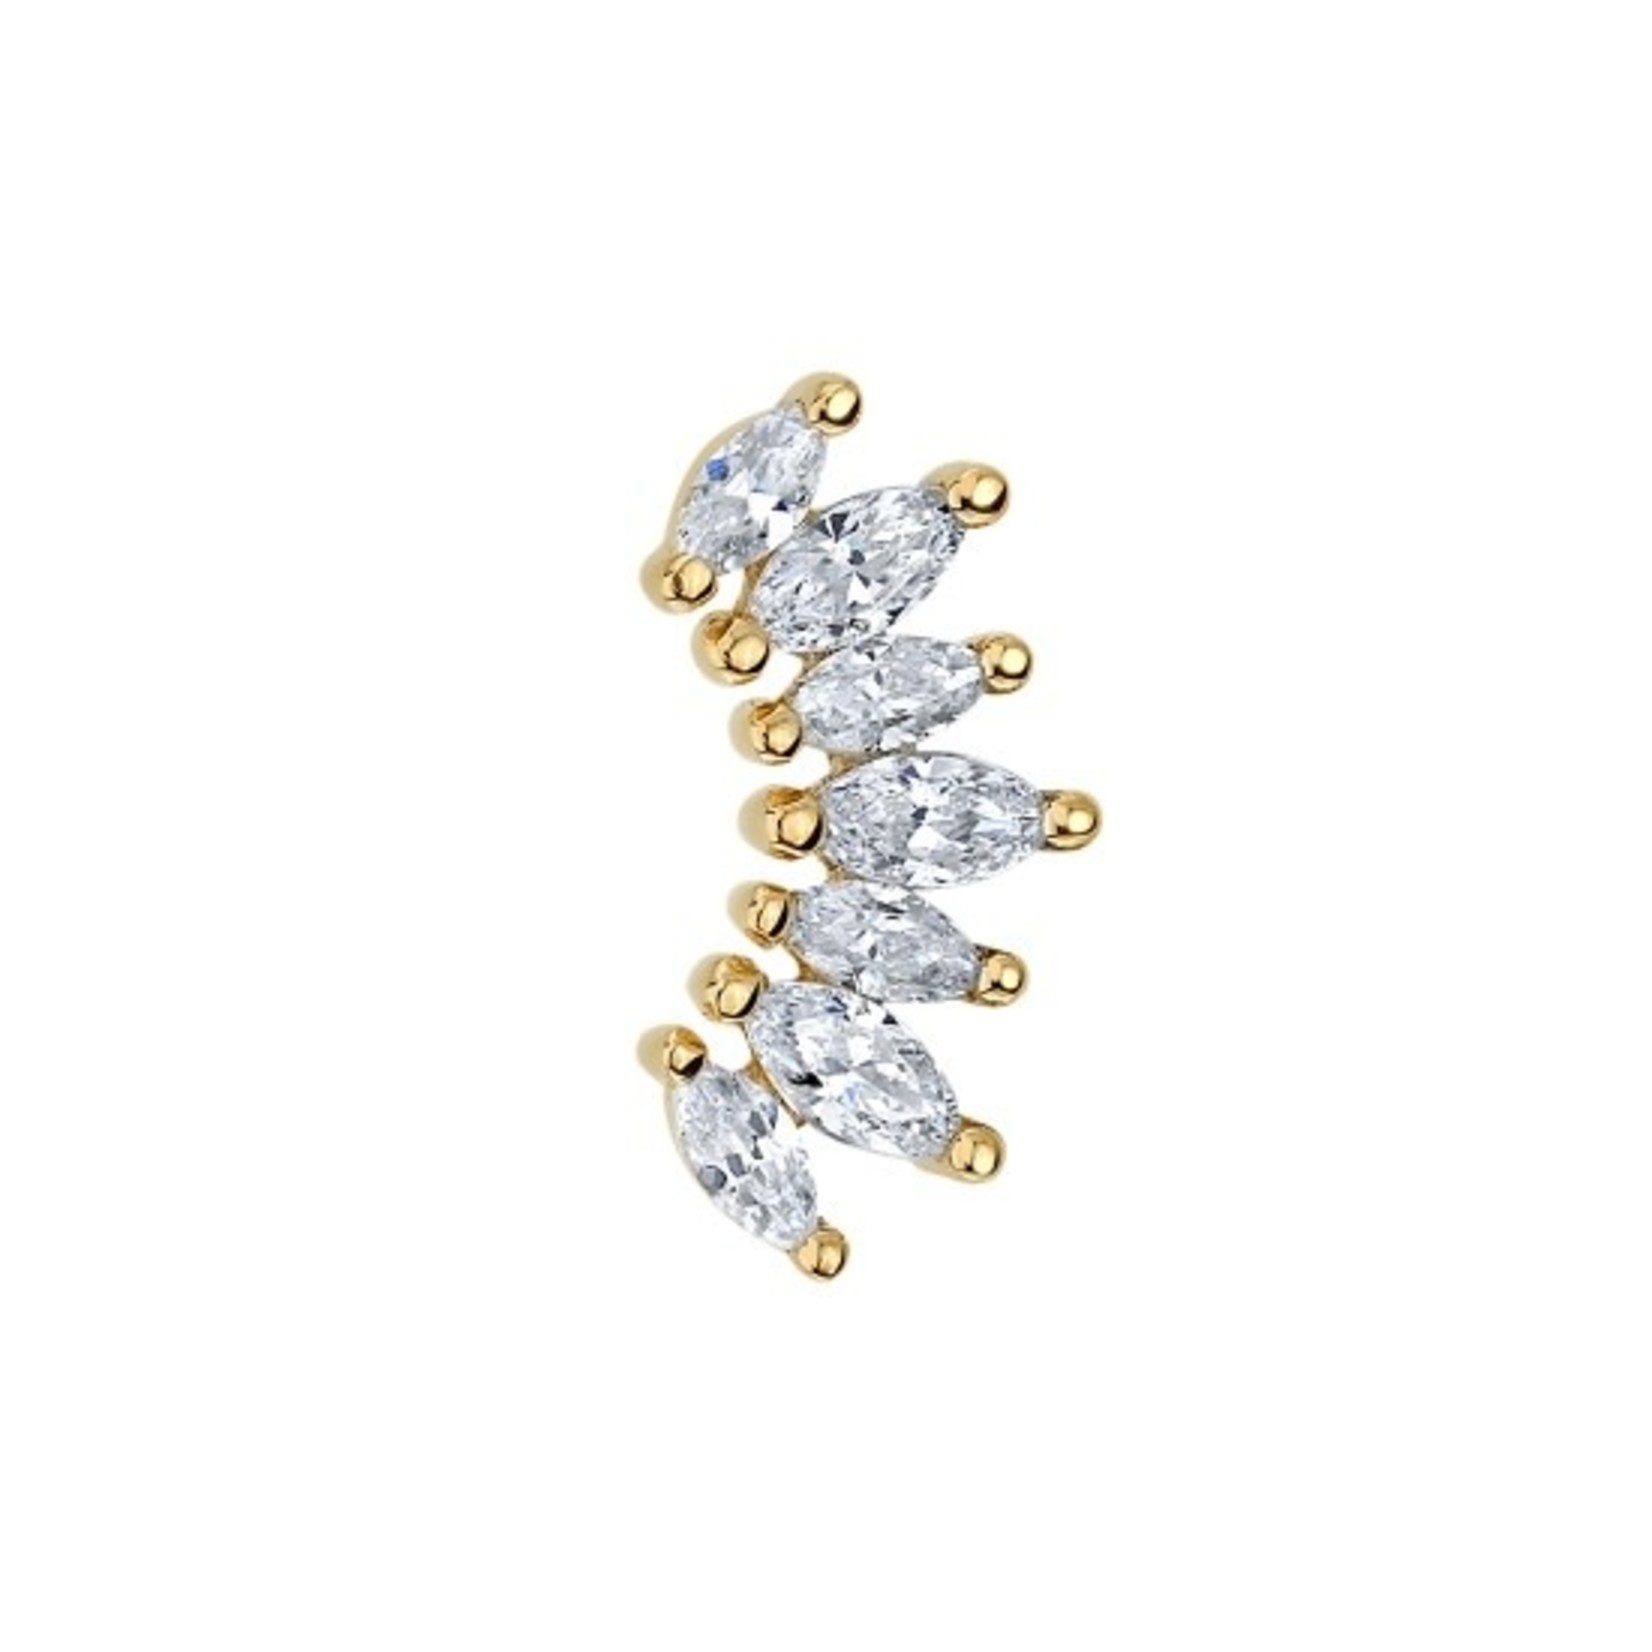 BVLA BVLA "Tiny Athena" threaded end with 4x 2.5x1.25 Marquise CZ and 3x 3x1.5 Marquise CZ